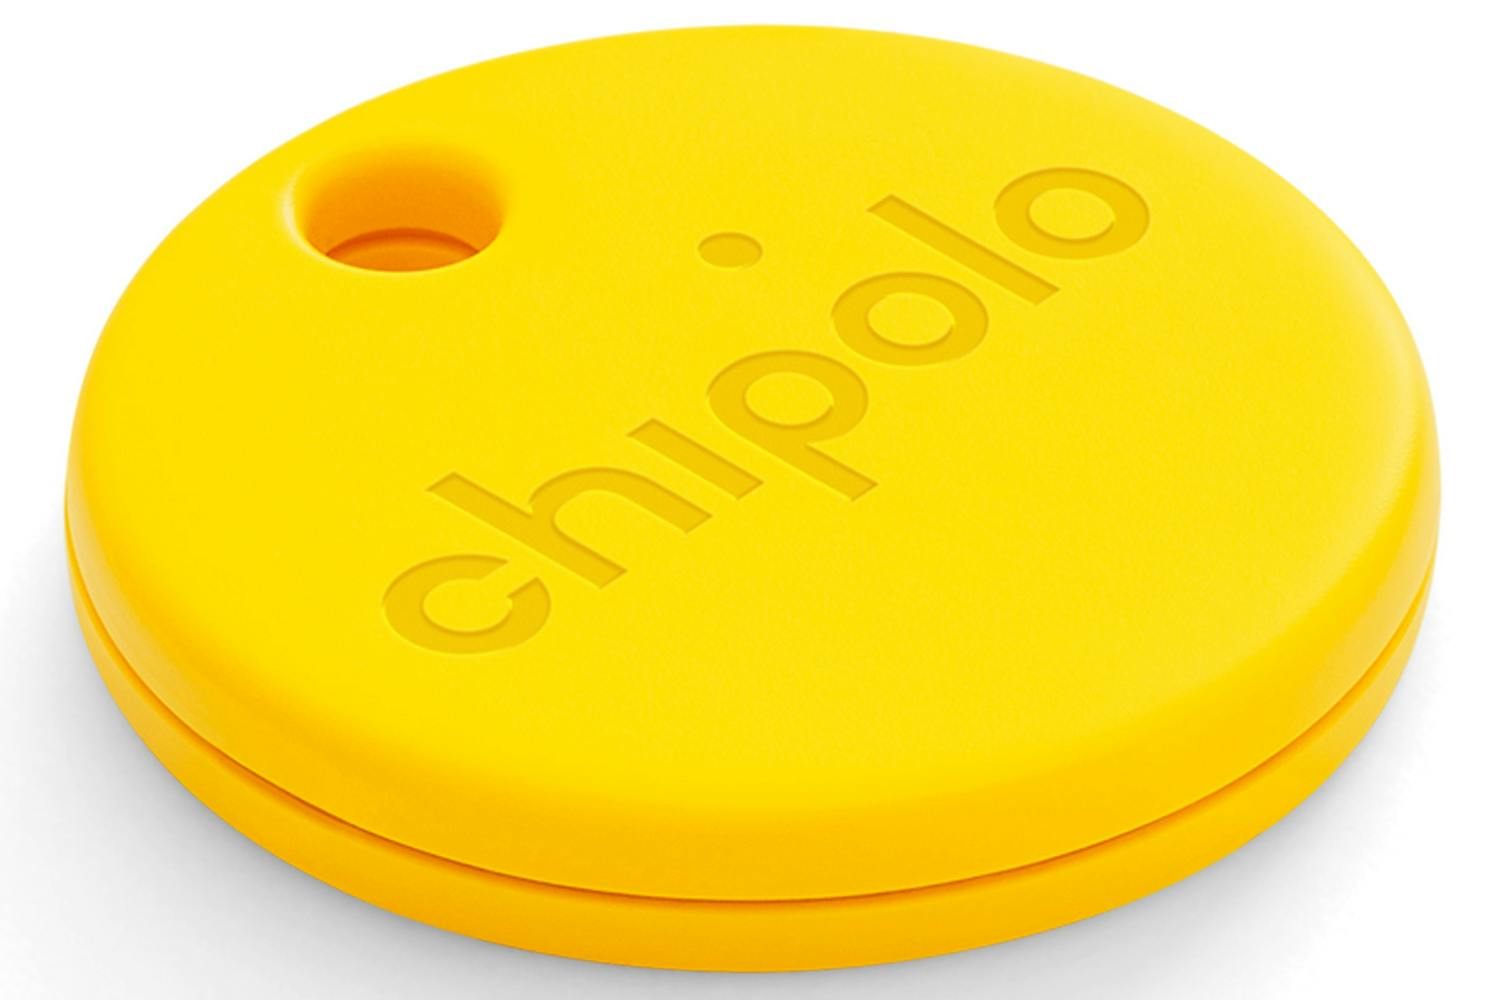 Chipolo One Bluetooth Item Finder | Yellow